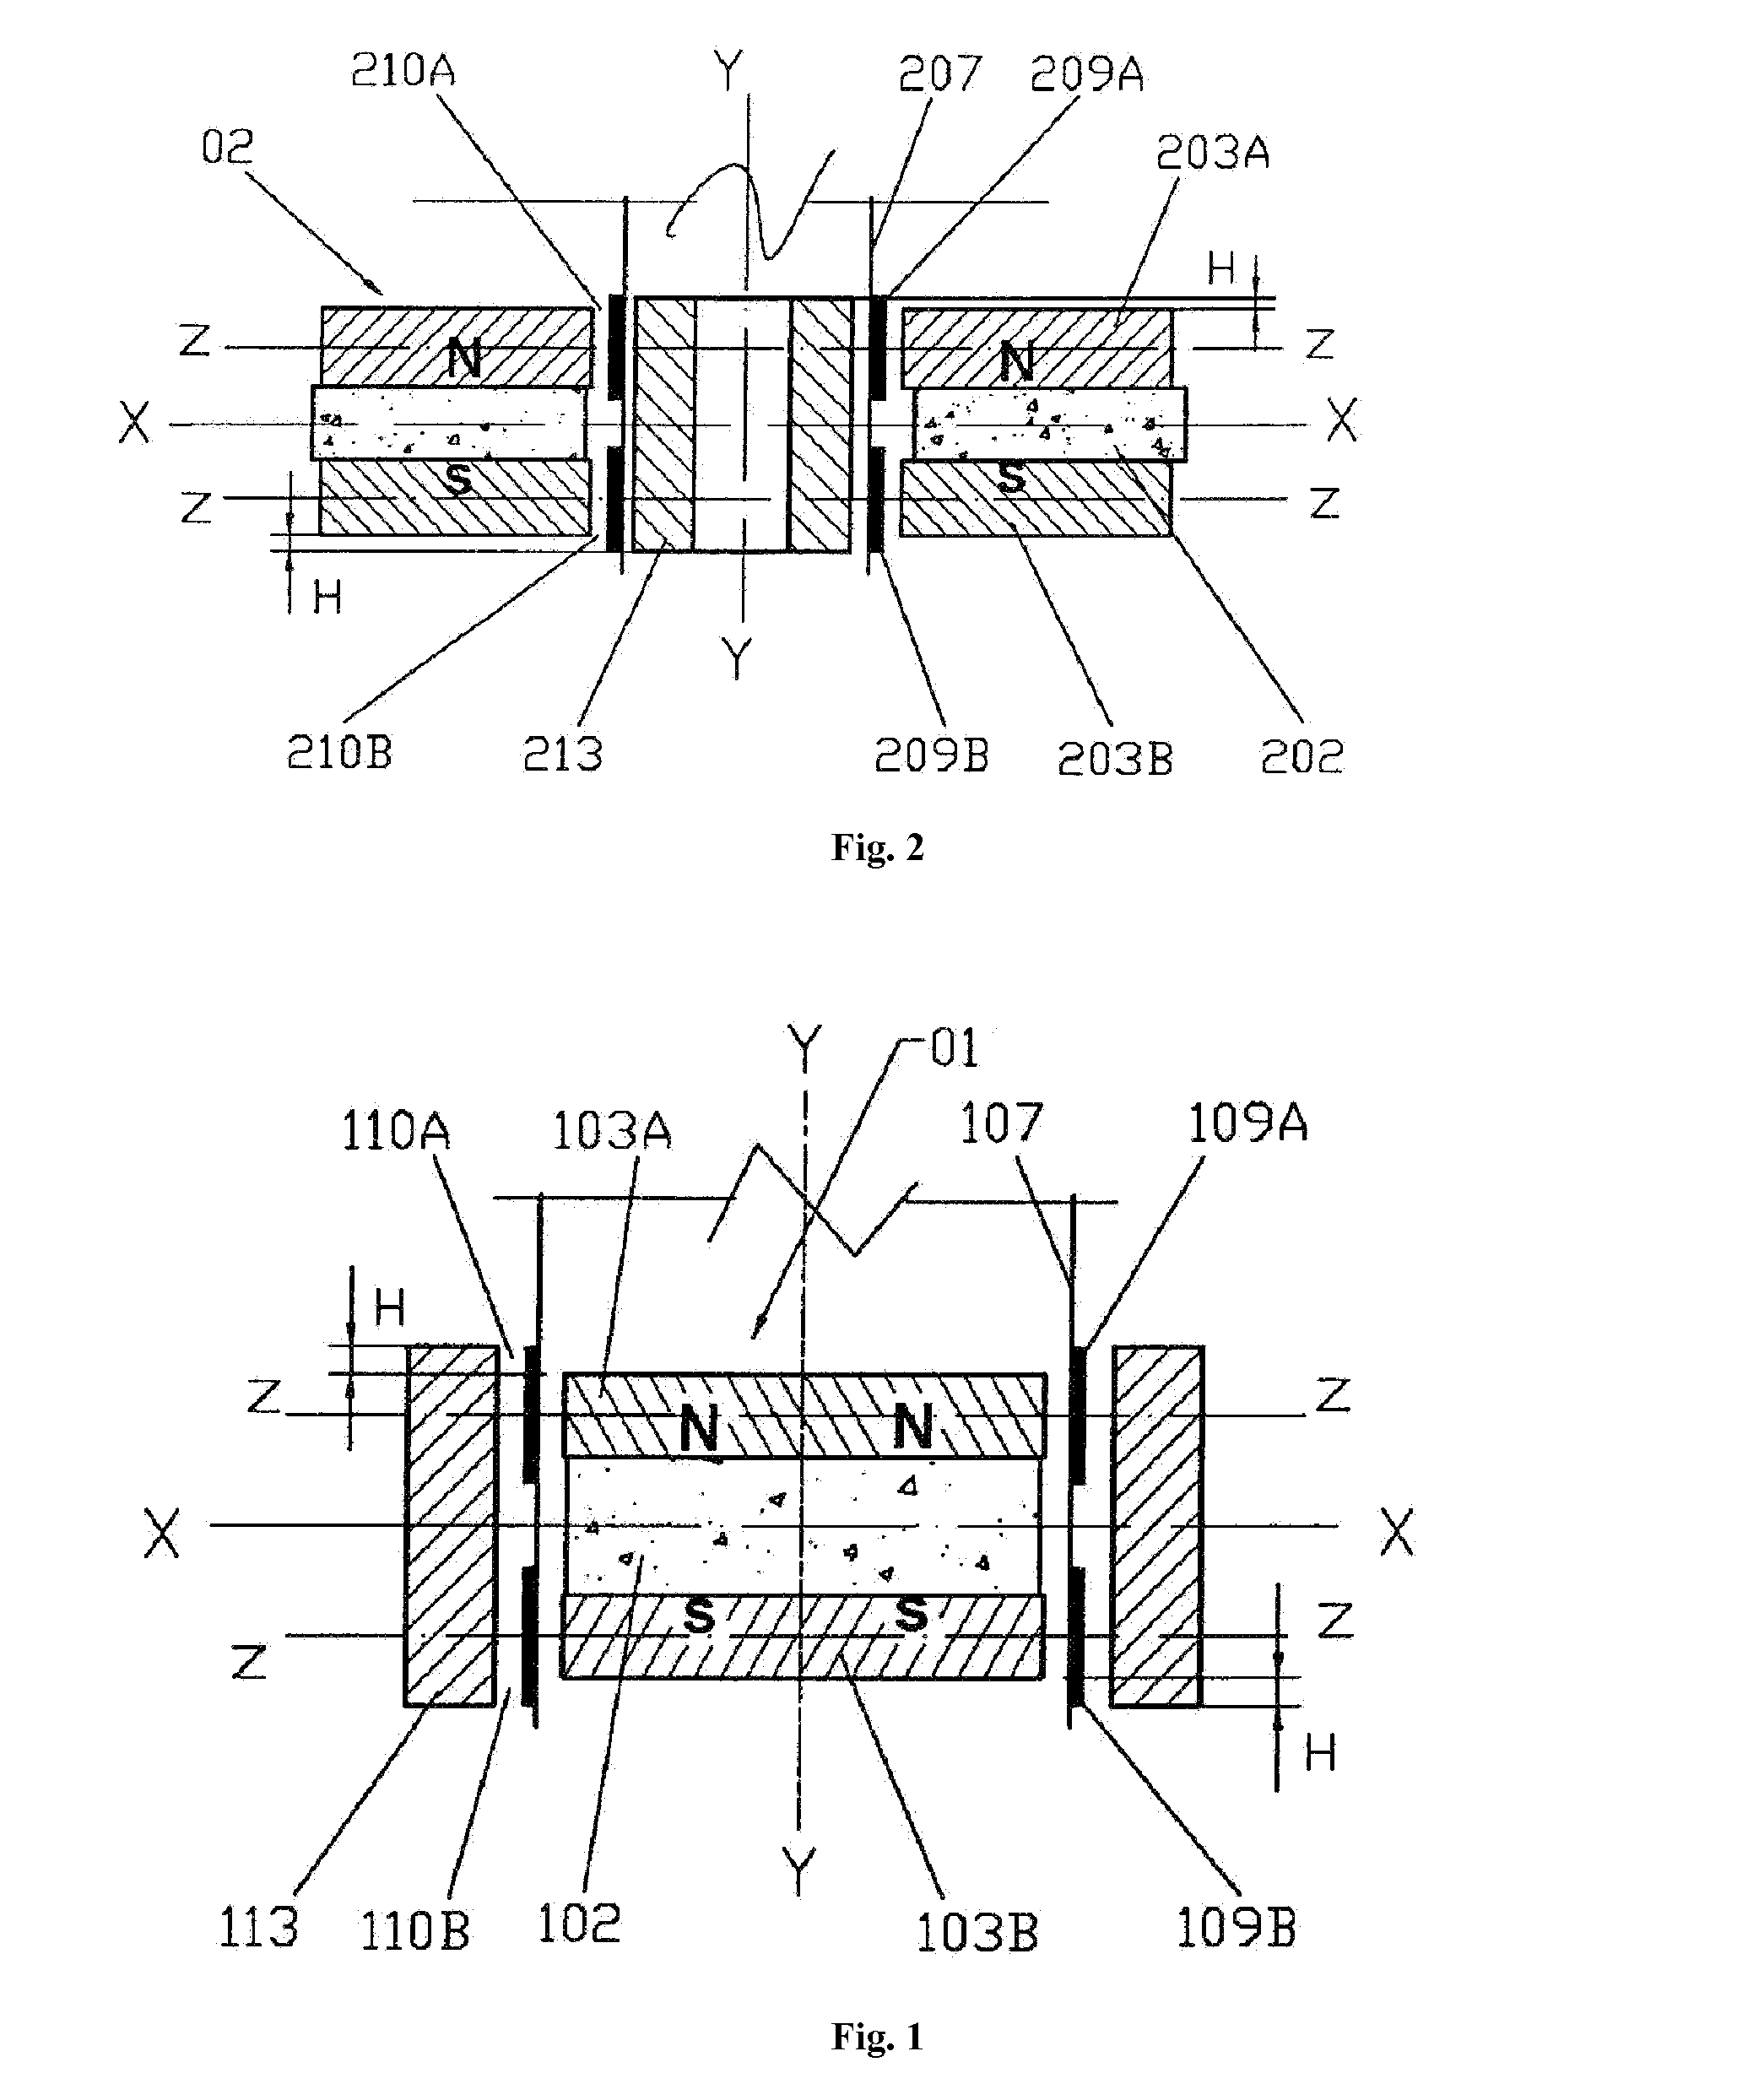 Multi-driver transducer having symmetrical magnetic circuit and symmetrical coil circuit